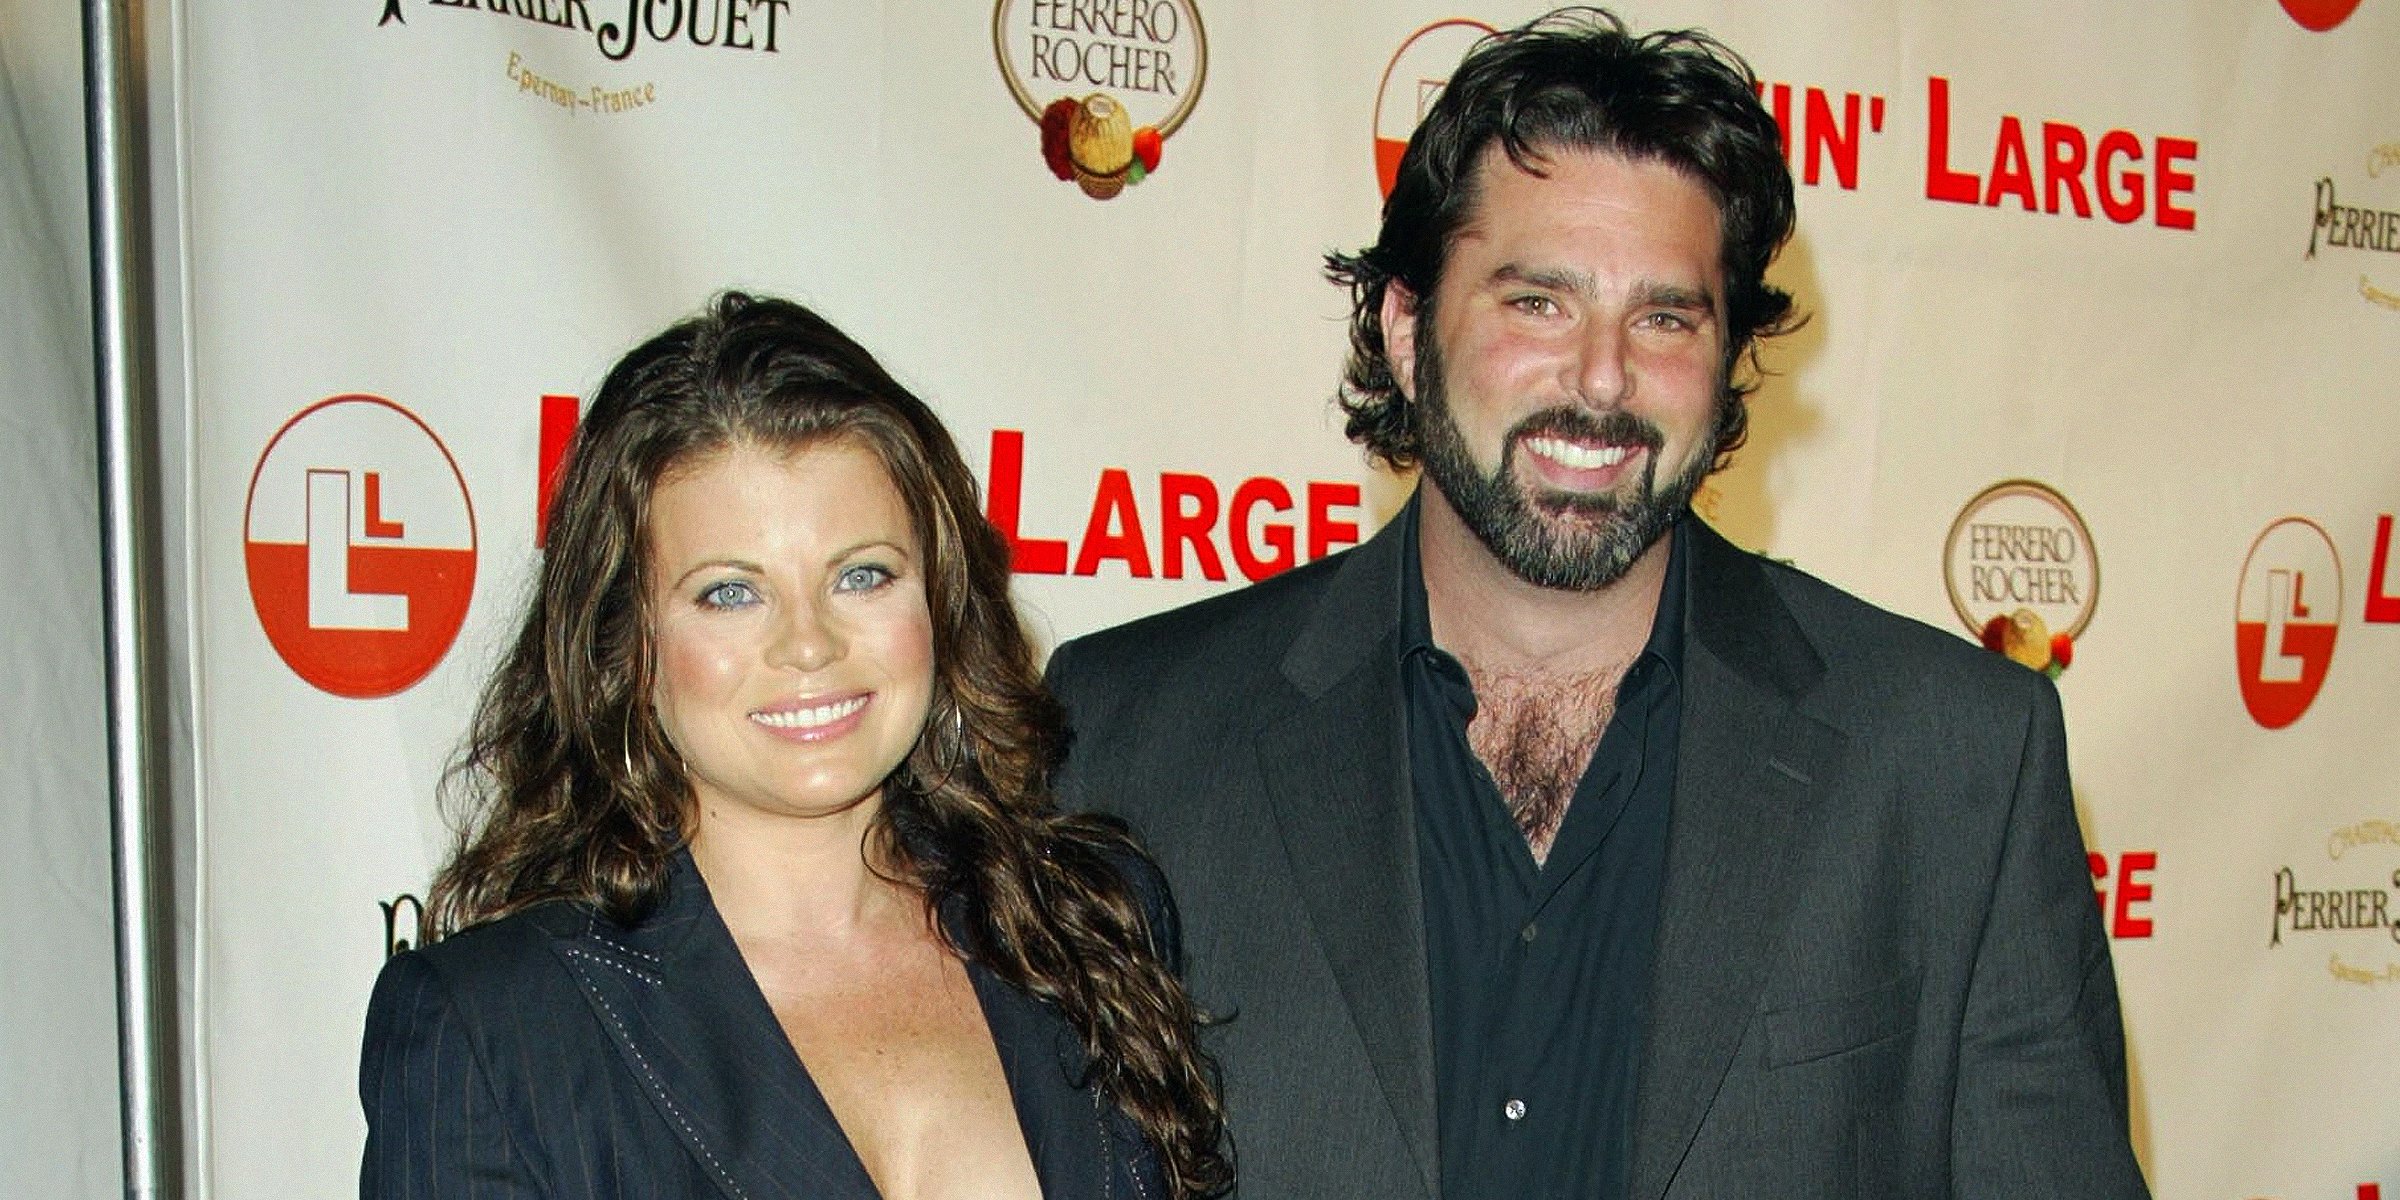 Yasmine Bleeth and Paul Cerrito | Source: Getty Images